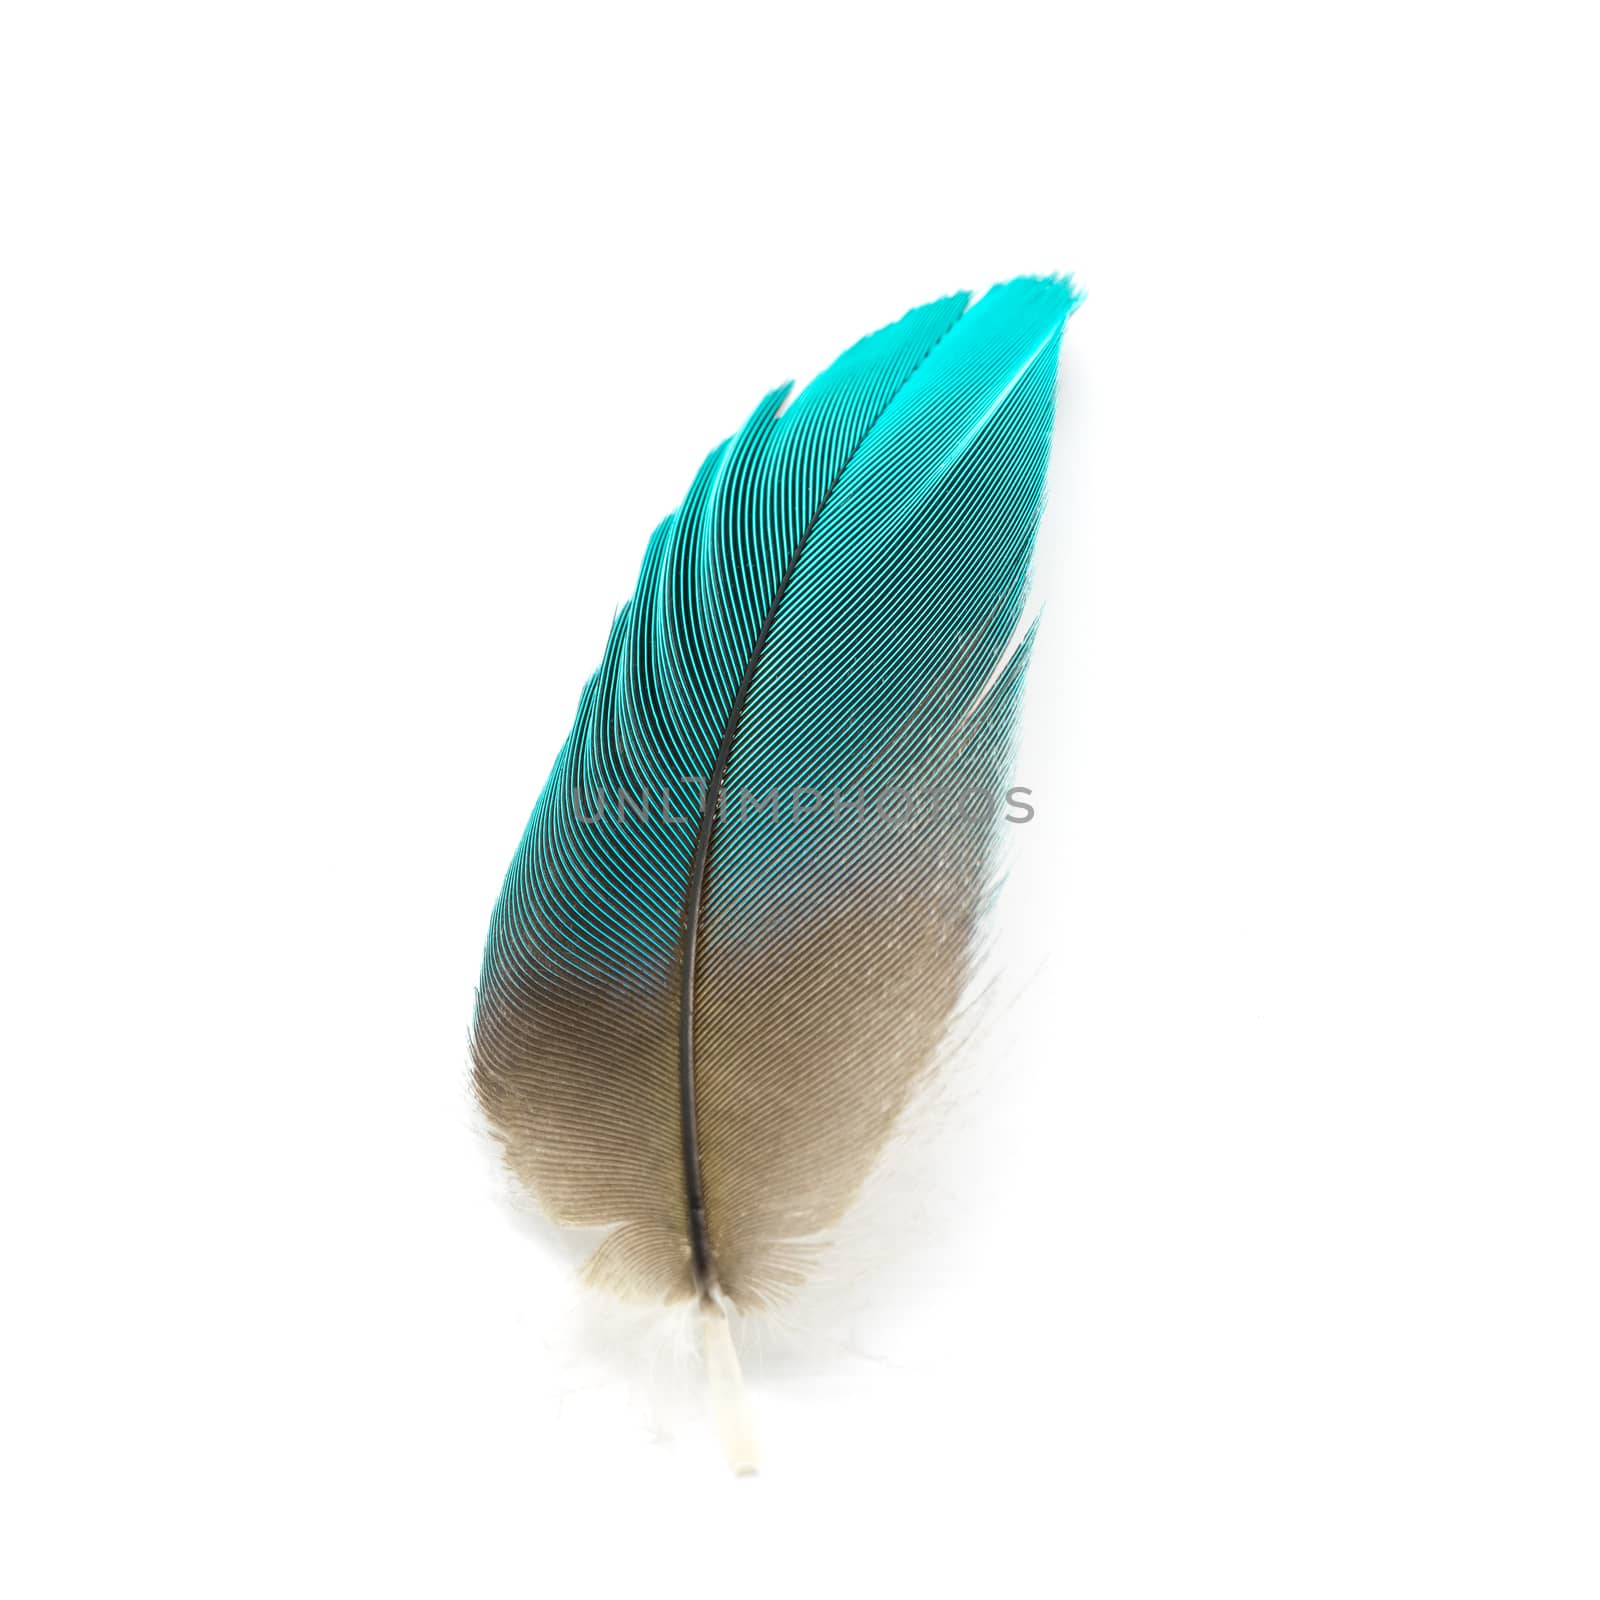 Colorful bird feather isolated on white background